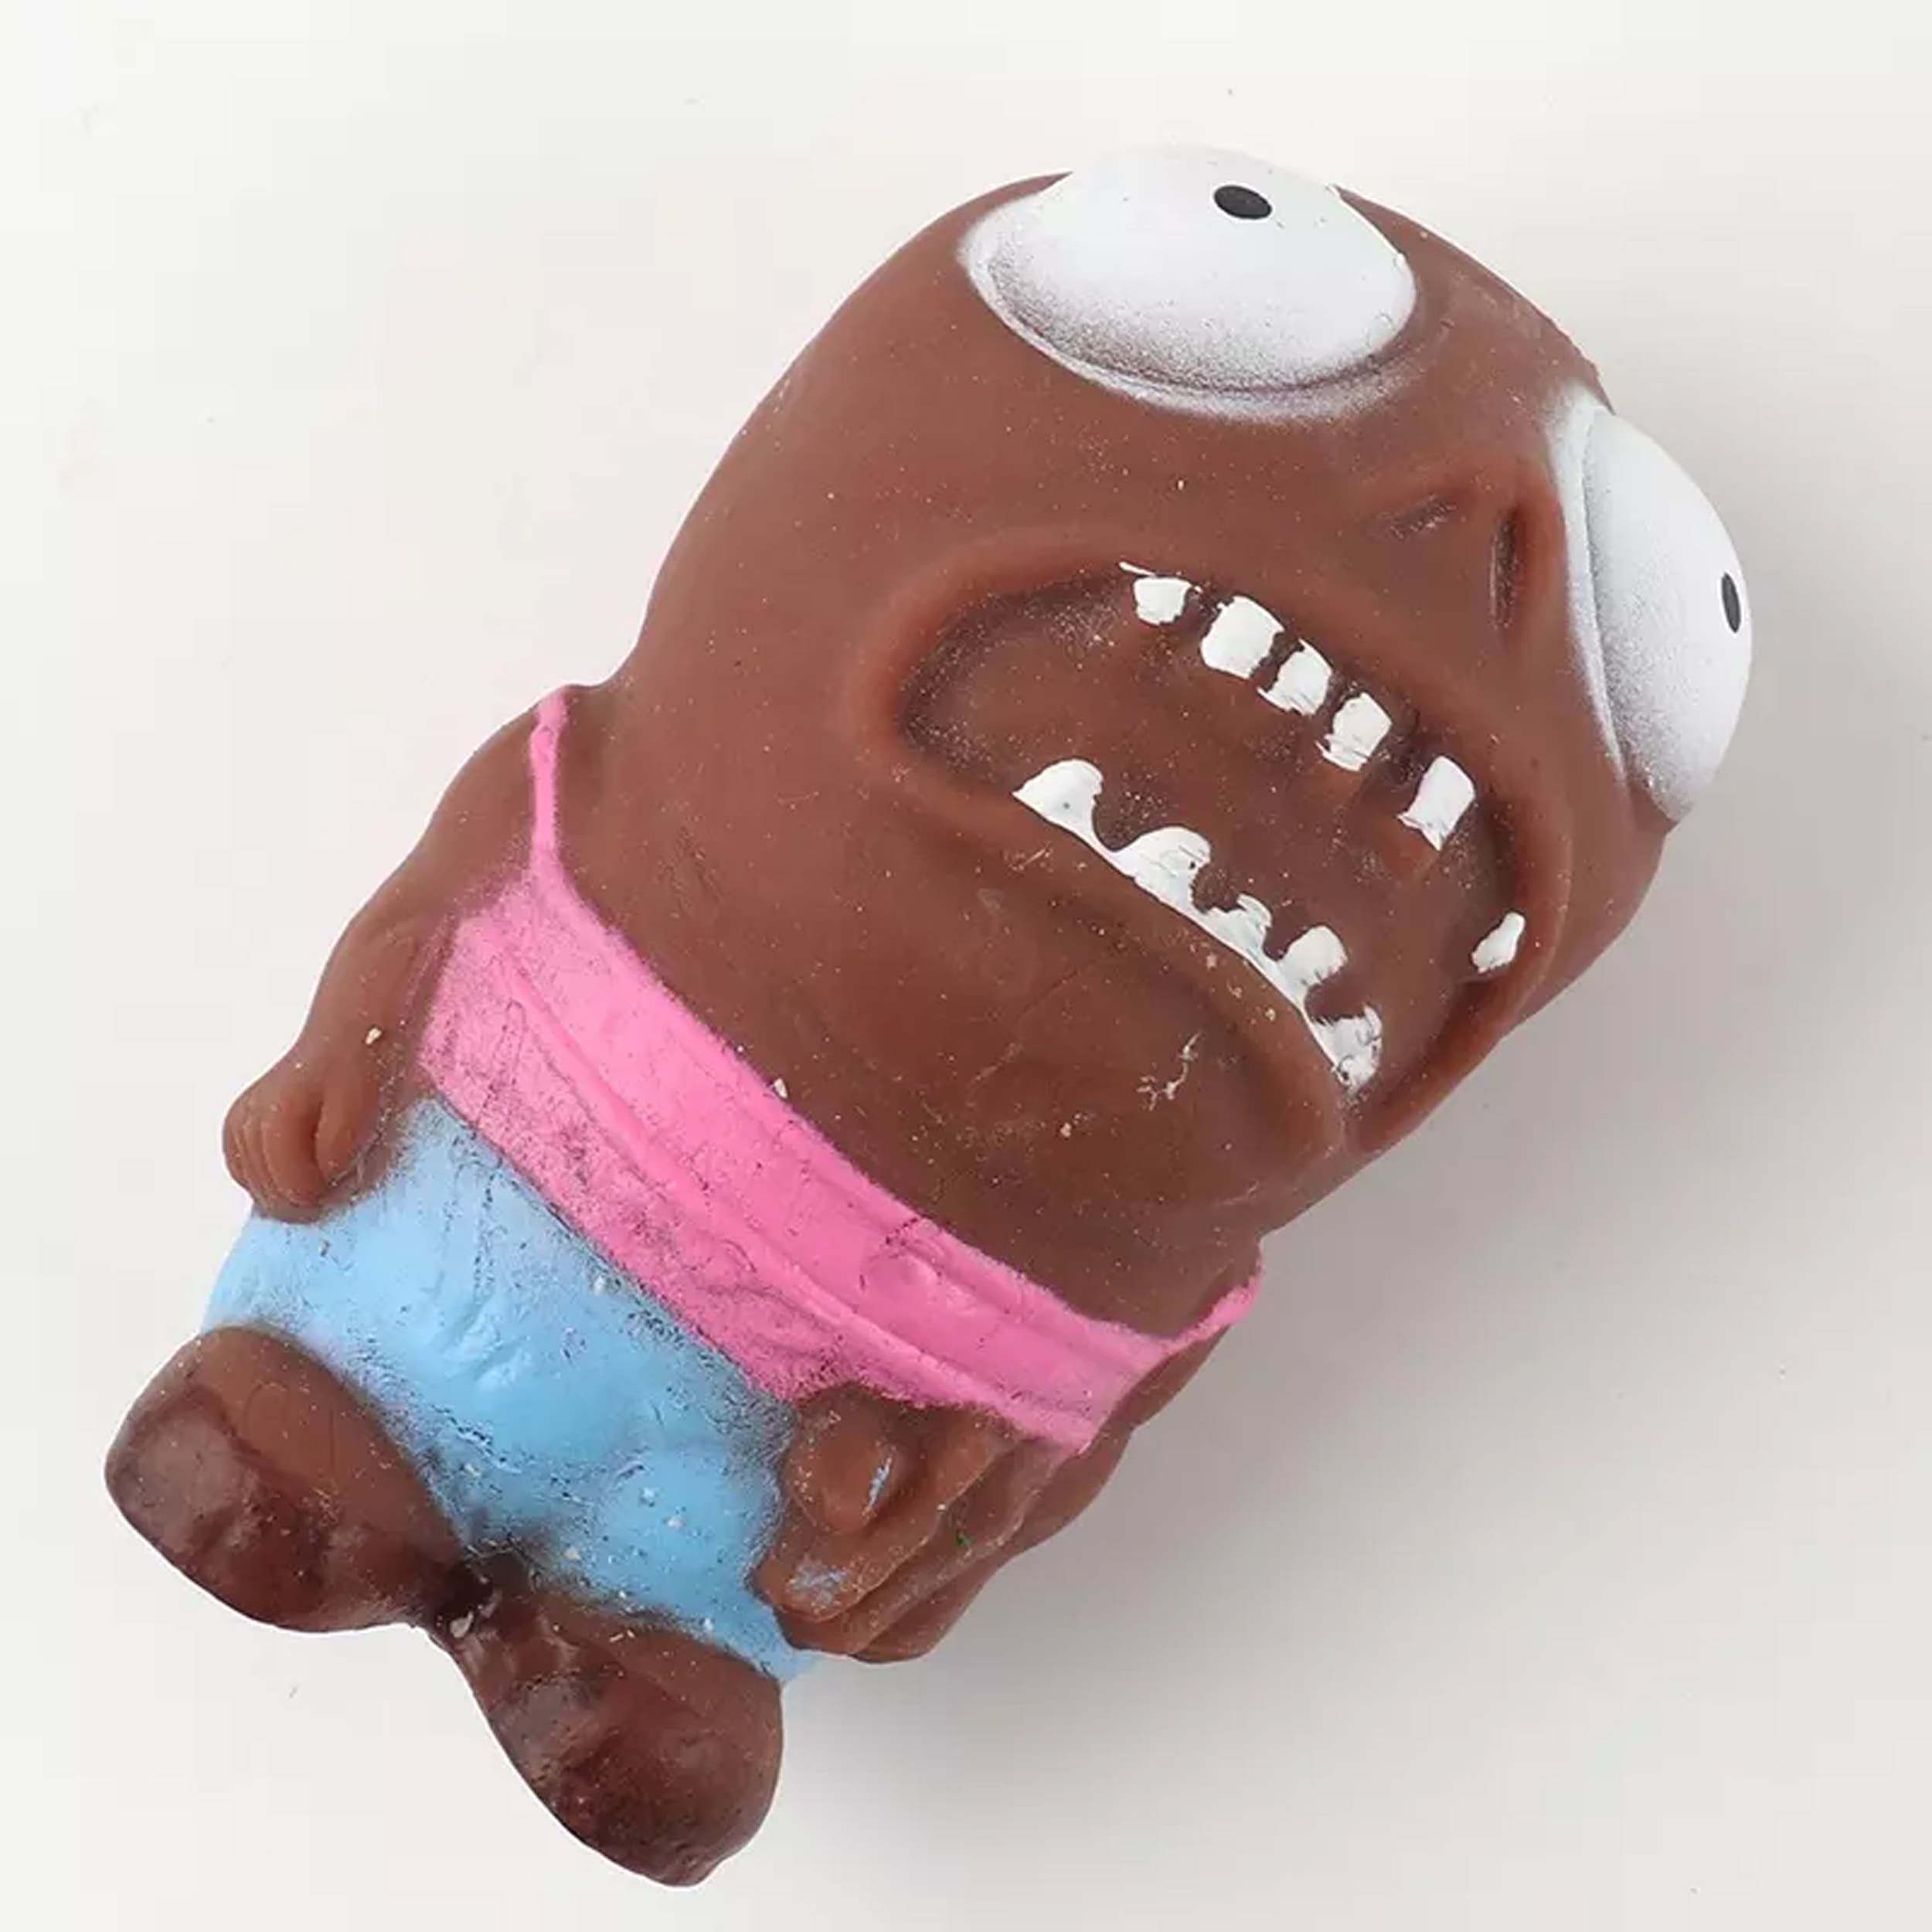 New Zombie Style Squishy Toy - Satisfying and Fun Stress Relief Toy for Kids and Adults